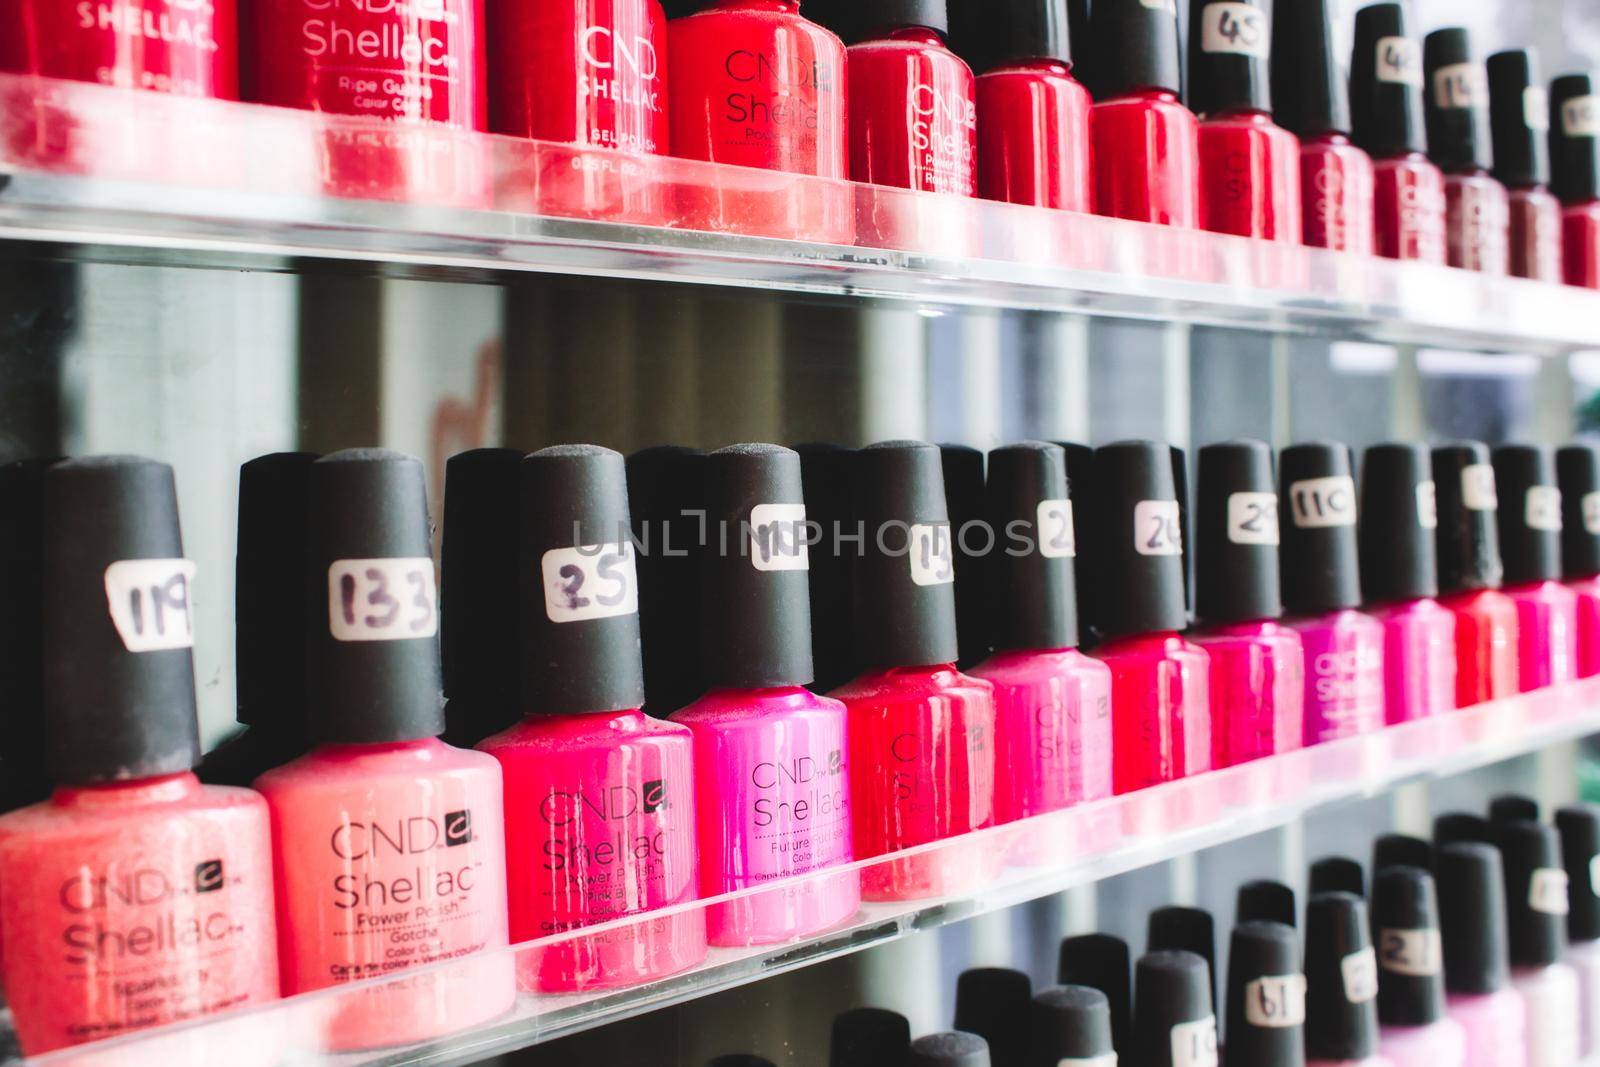 Rabat / Malta - December 8 2019: Rows of bottles of pink and red nail polish on shelves in a beauty spa by tennesseewitney